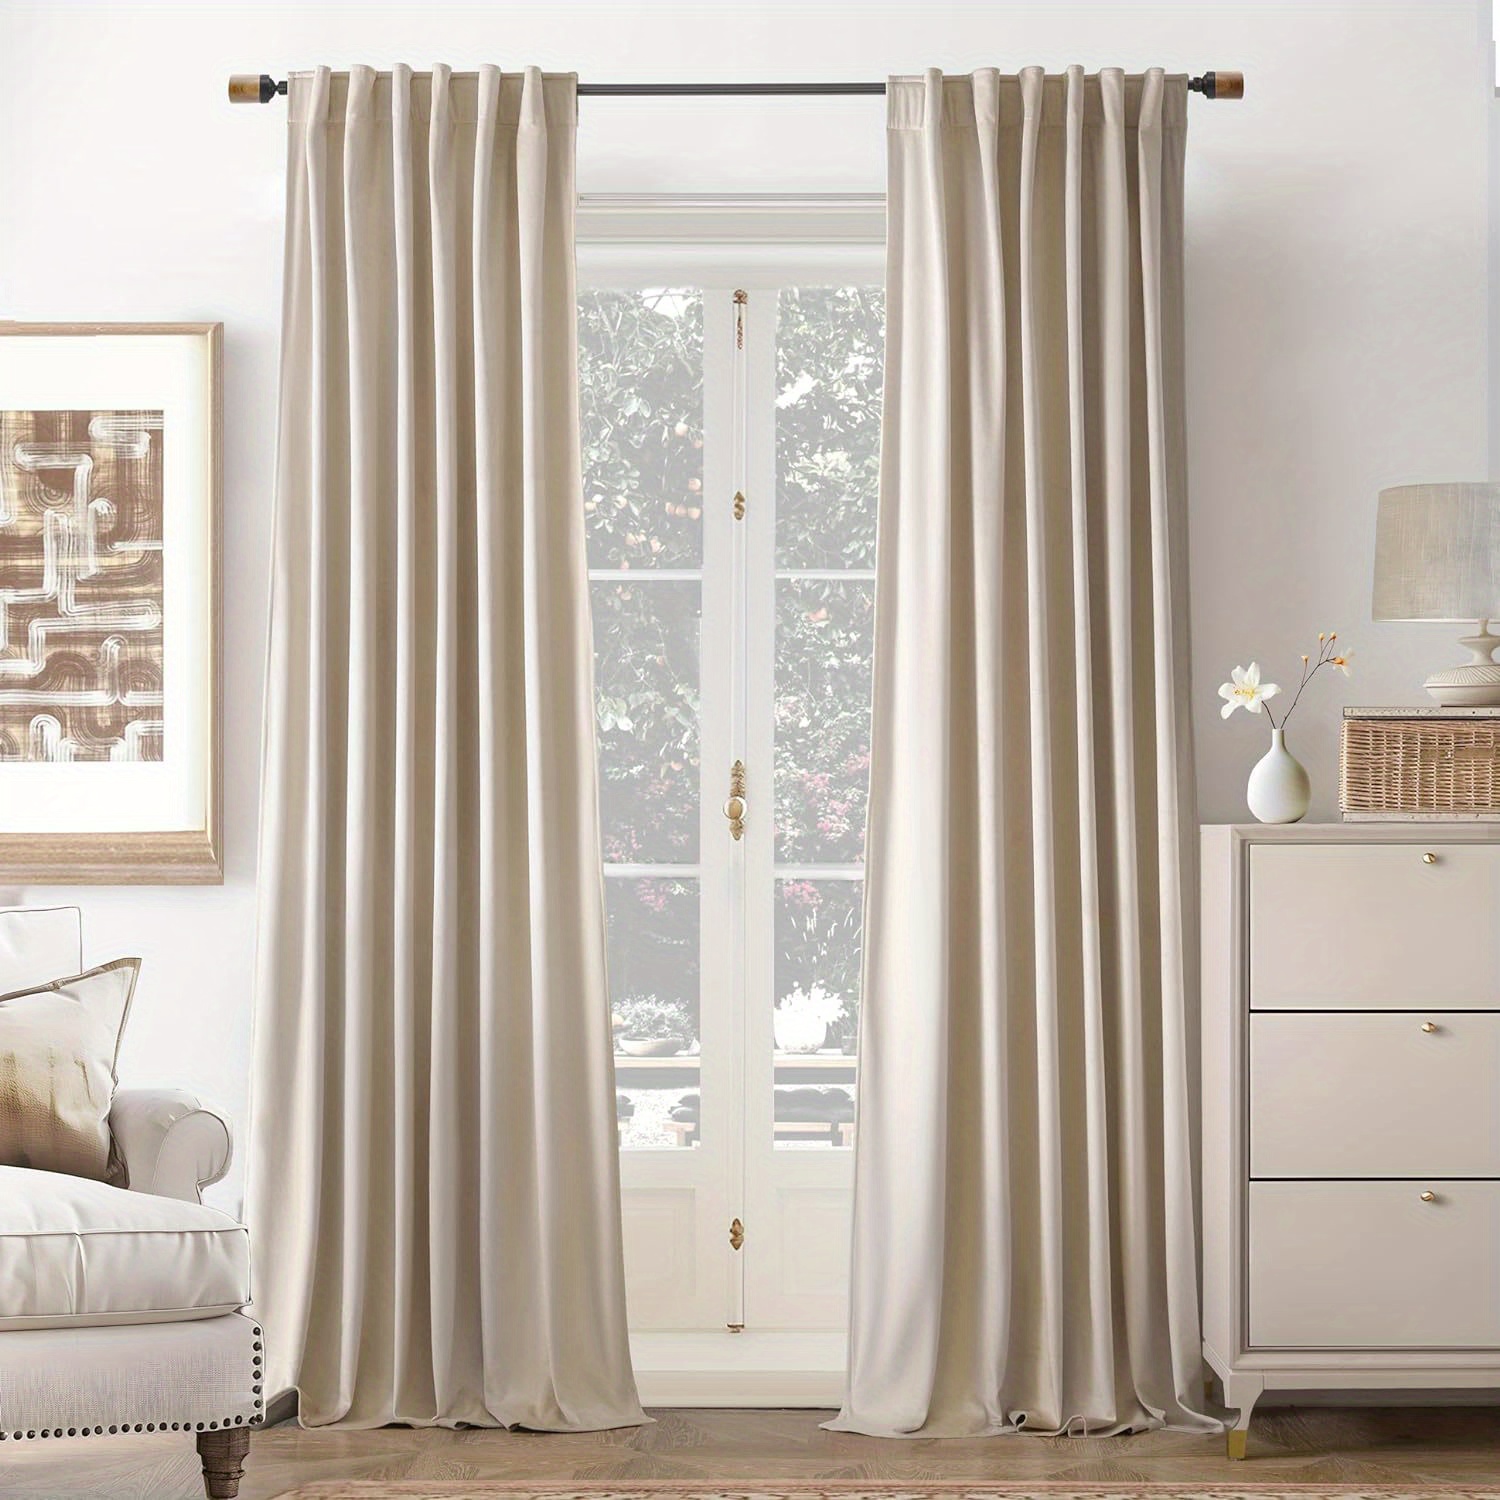 

Velvet Blackout Curtains Beige Room Darkening Curtains 2 Panel Set Super Soft Luxury Thermal Insulated Drapes For Living Room Back Tab And Rod Pocket